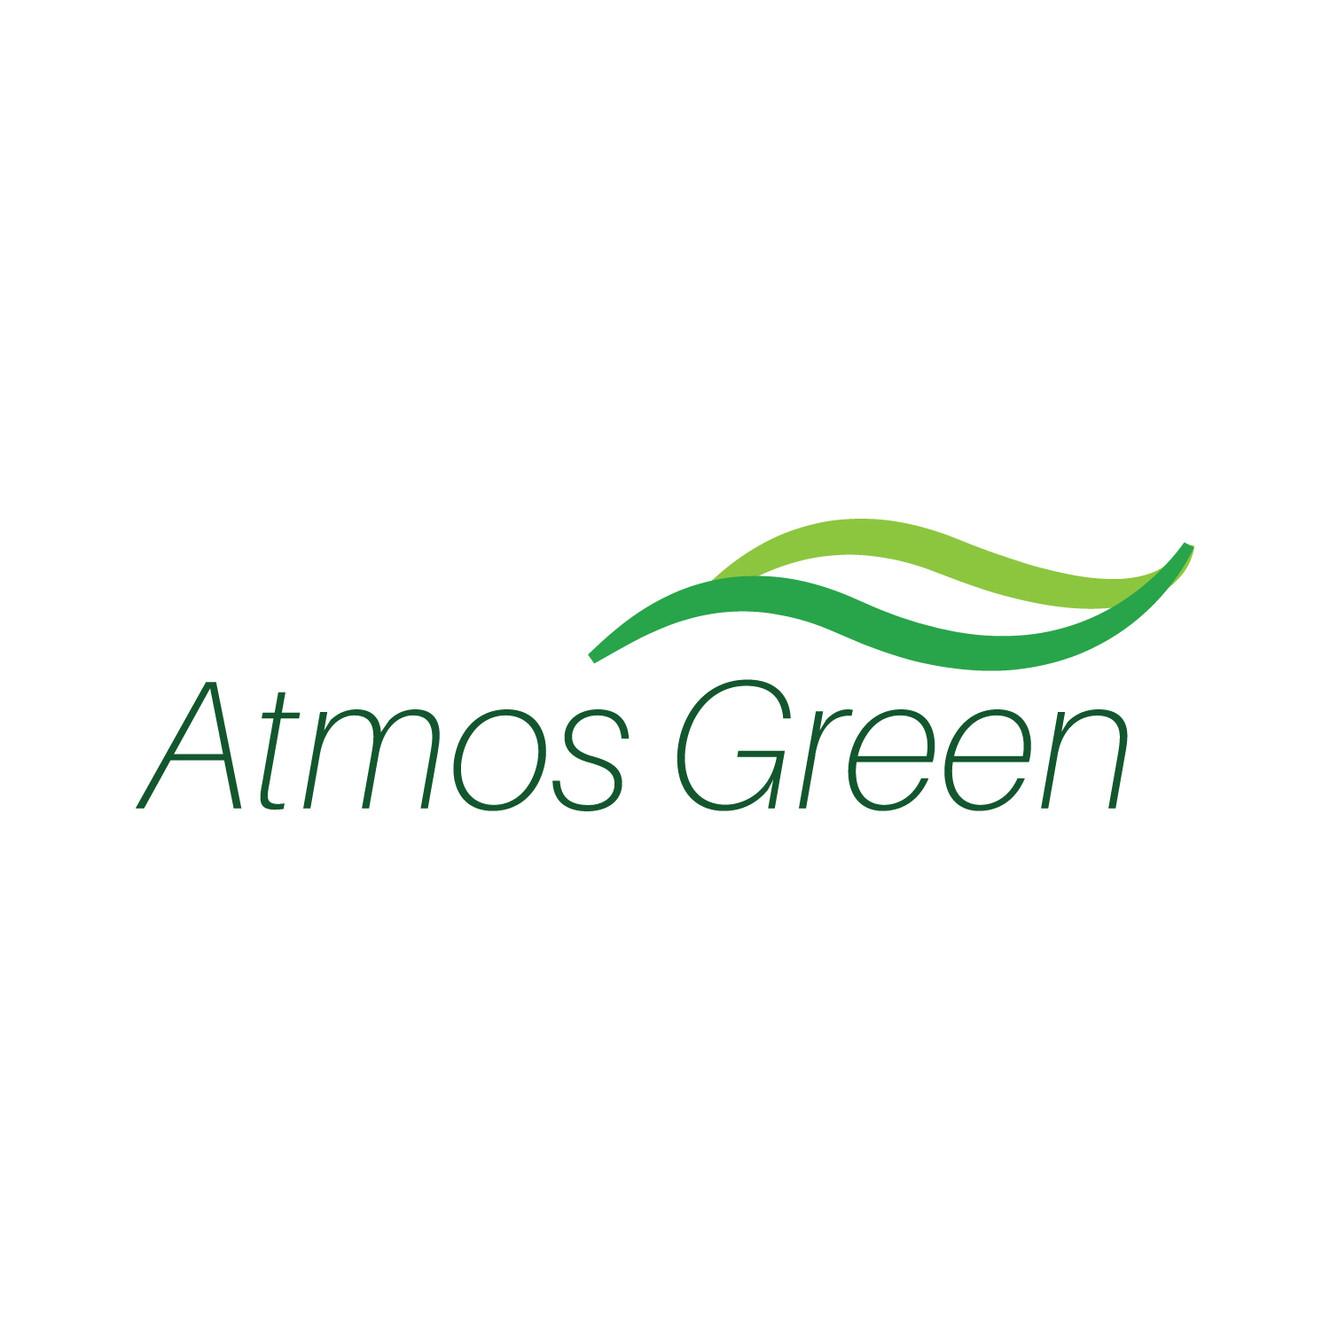 Product ALL PRODUCTS | Atmos Green image